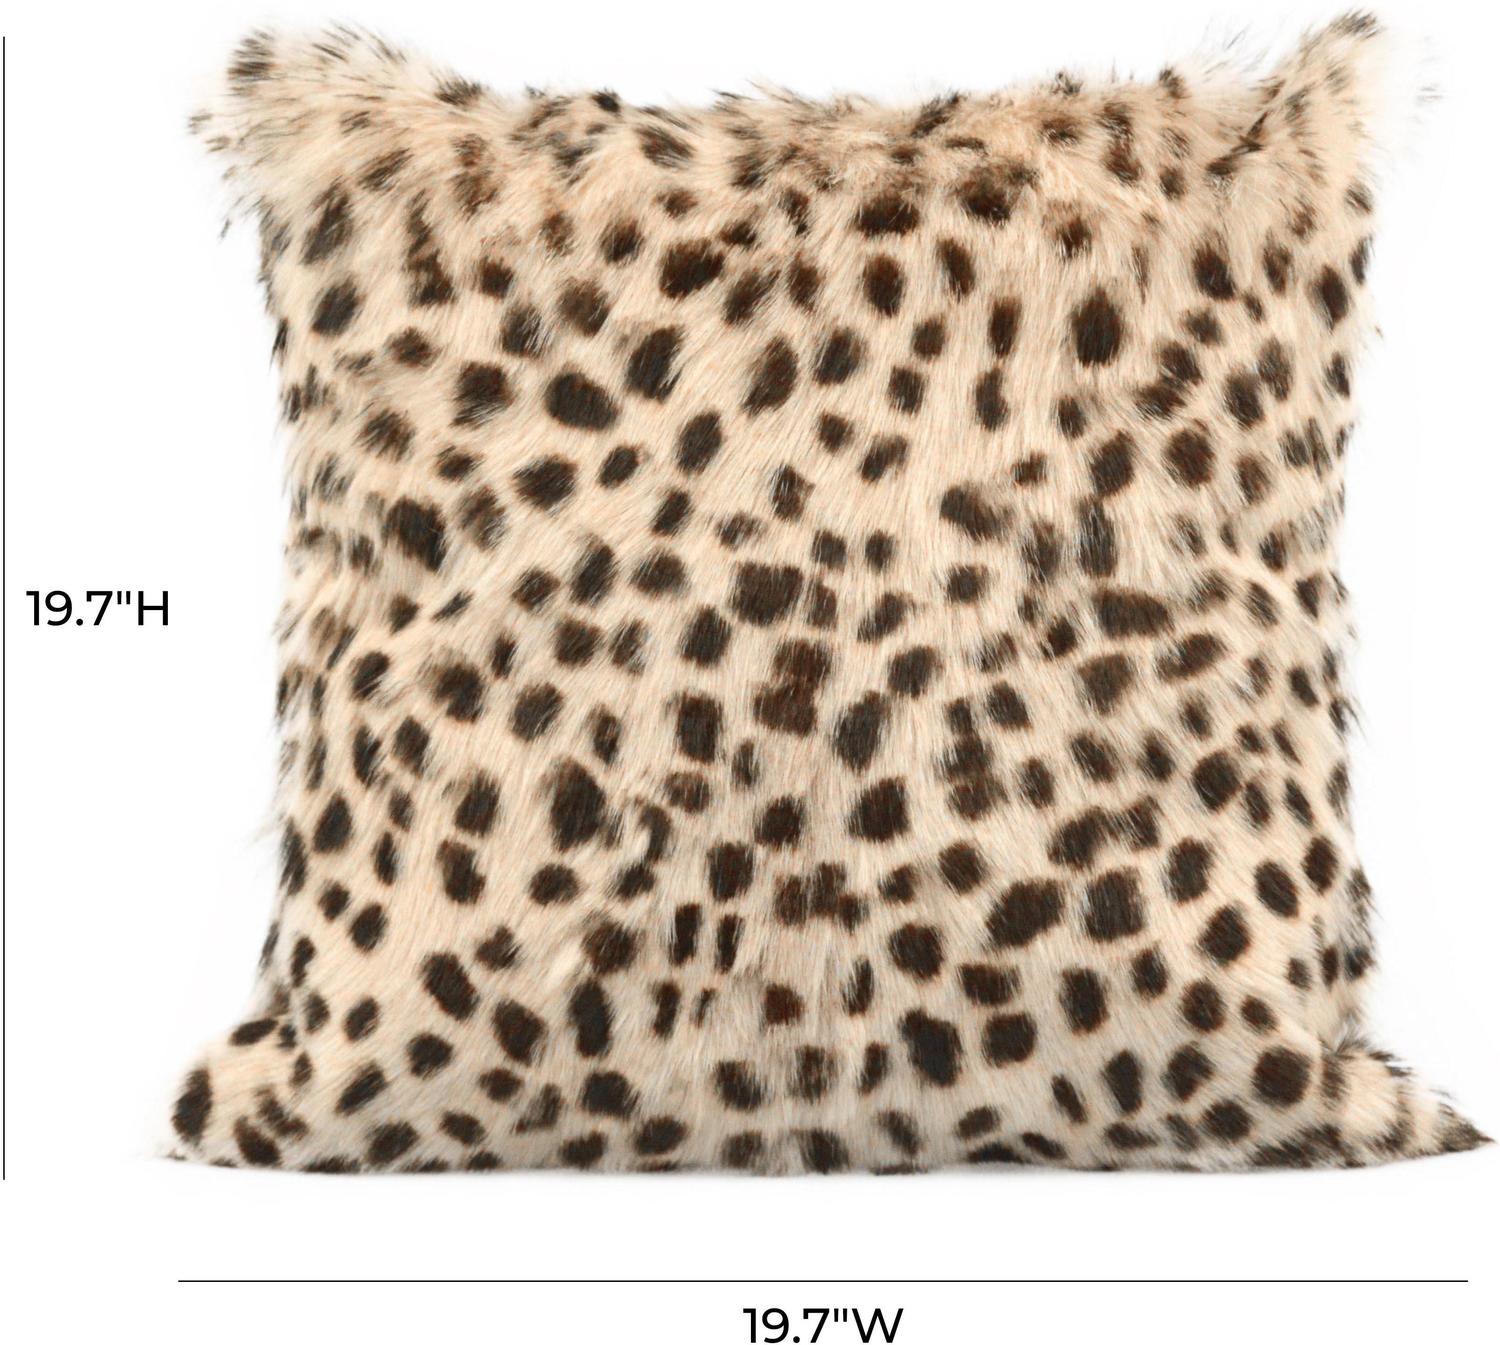 navy throw pillows for couch Contemporary Design Furniture Pillows Leopard